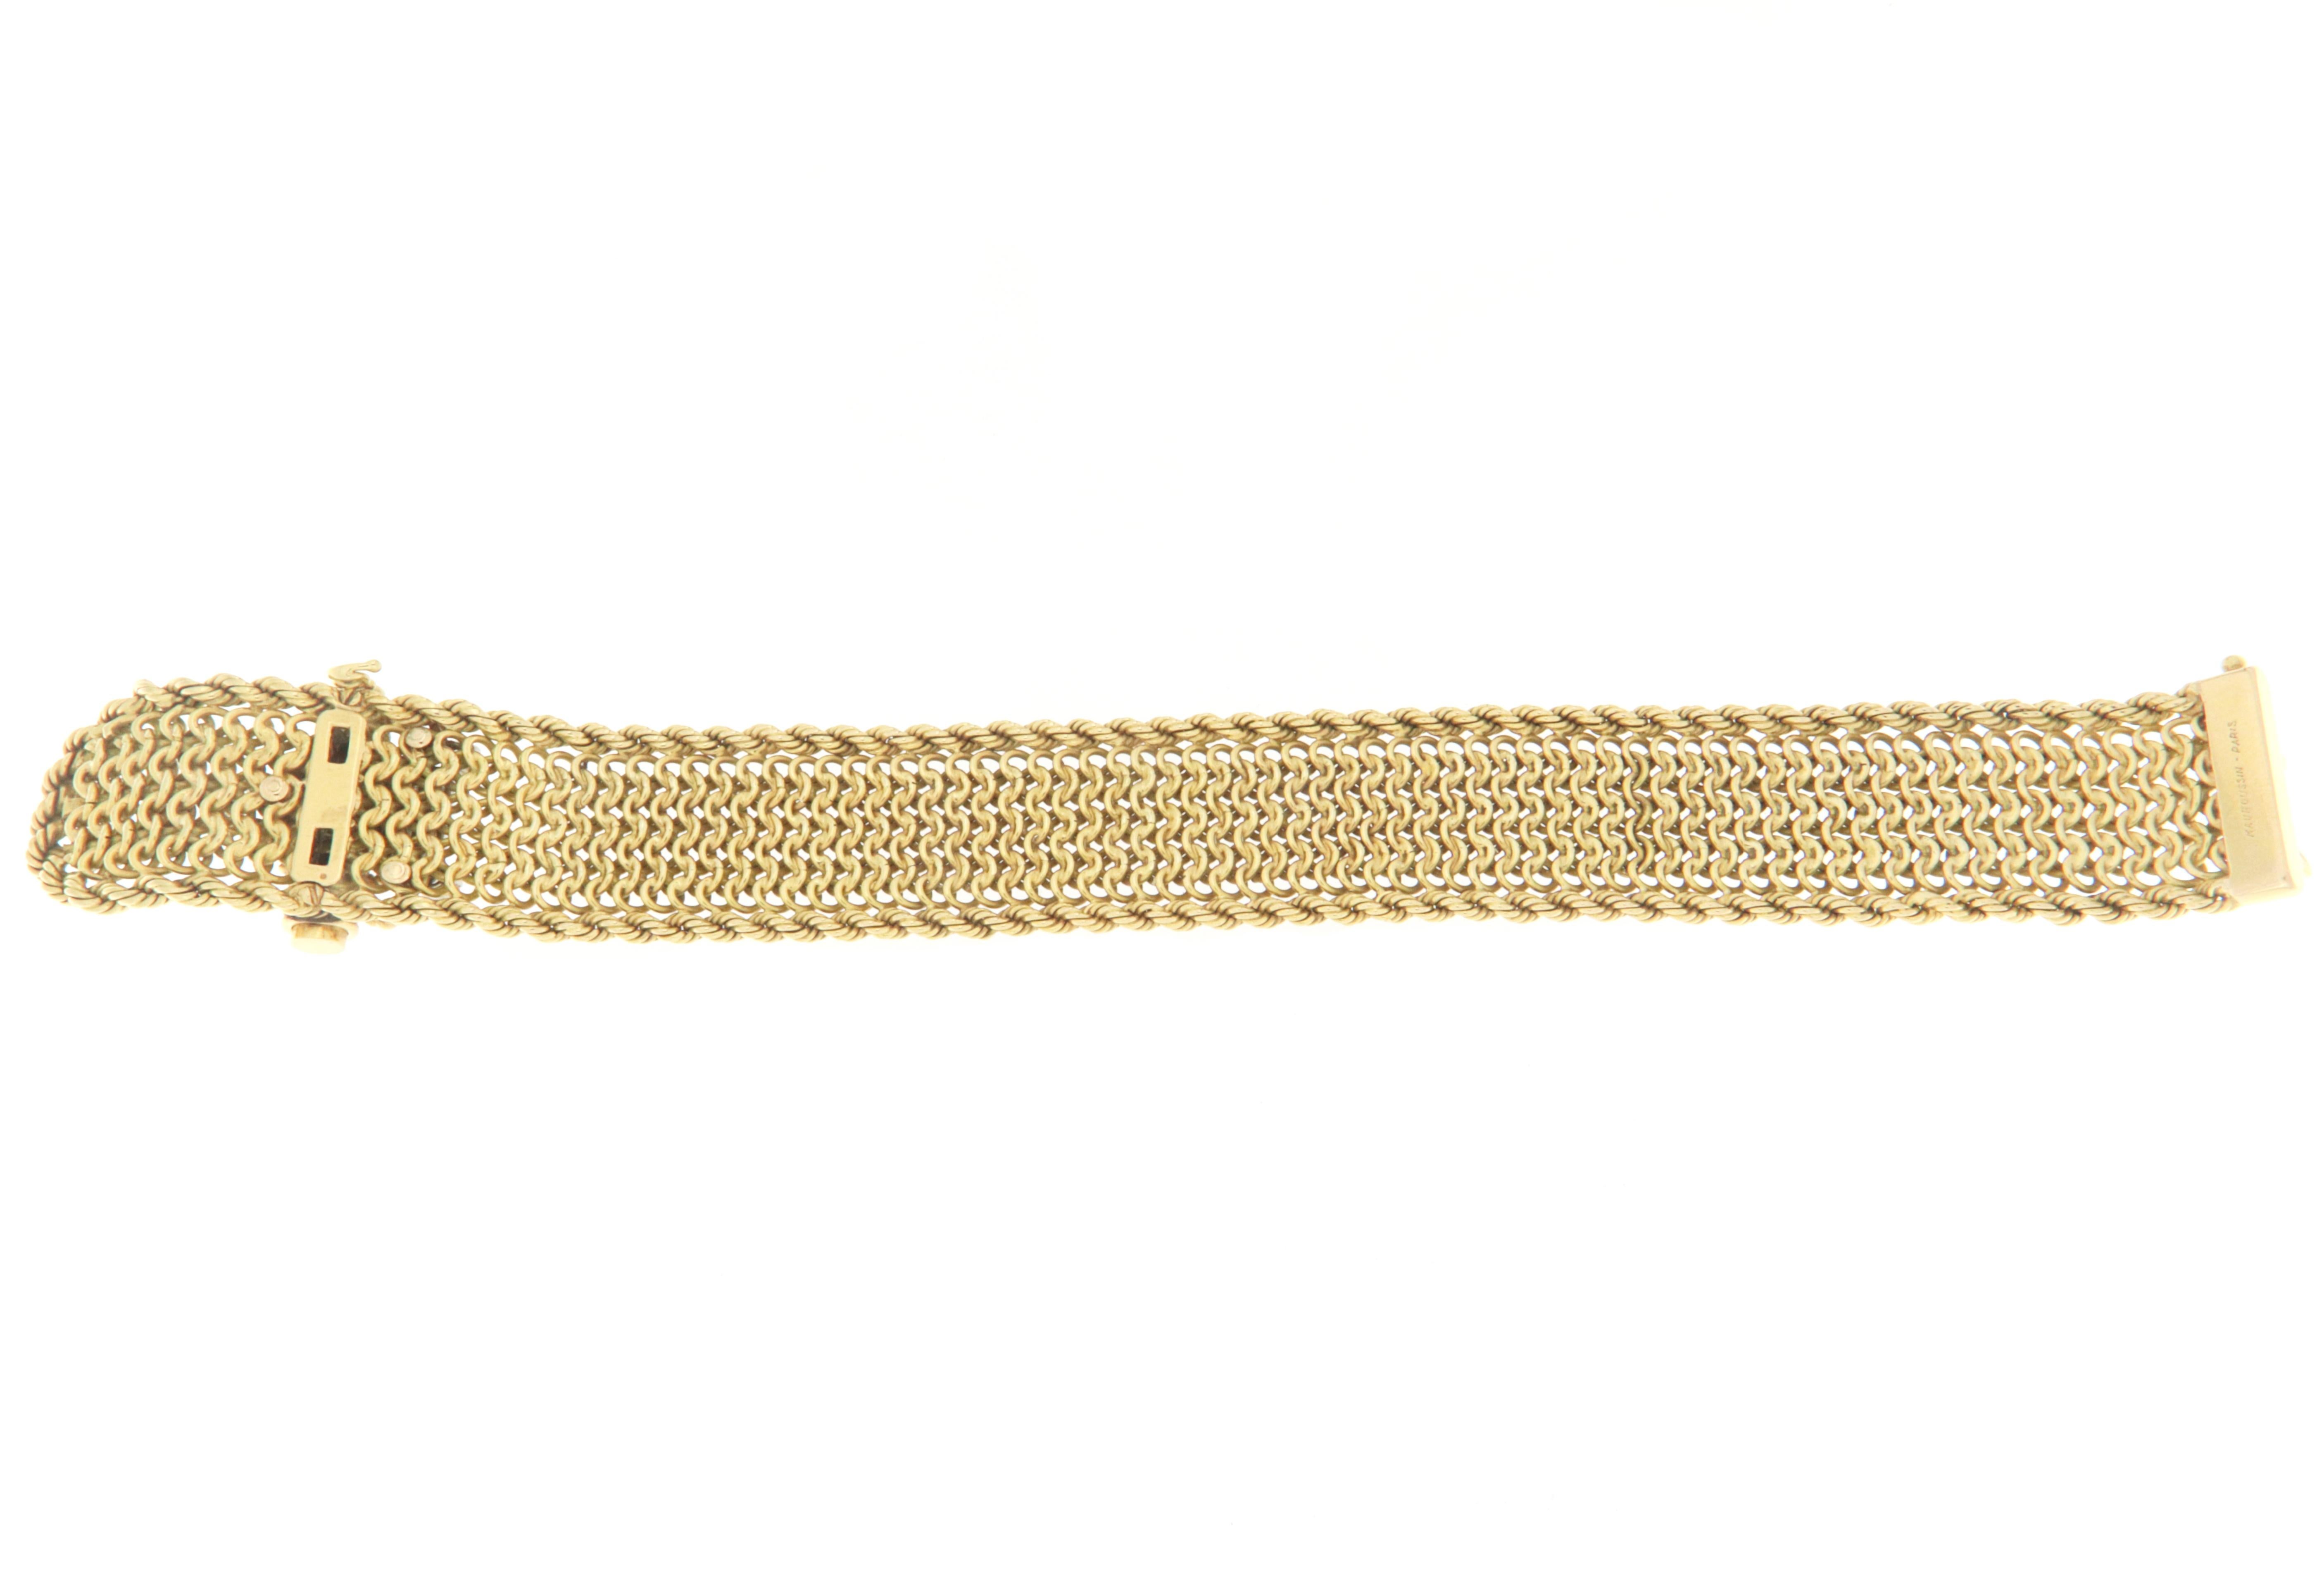 Fantastic bracelet 18 karat yellow gold signed by a famous French jeweler from Paris called Mauboussin. The bracelet is entirely handmade with 1.50 karat diamonds

Bracelet total weight 88.80 grams
the bracelet has a length of 18 cm.
Diamonds weight